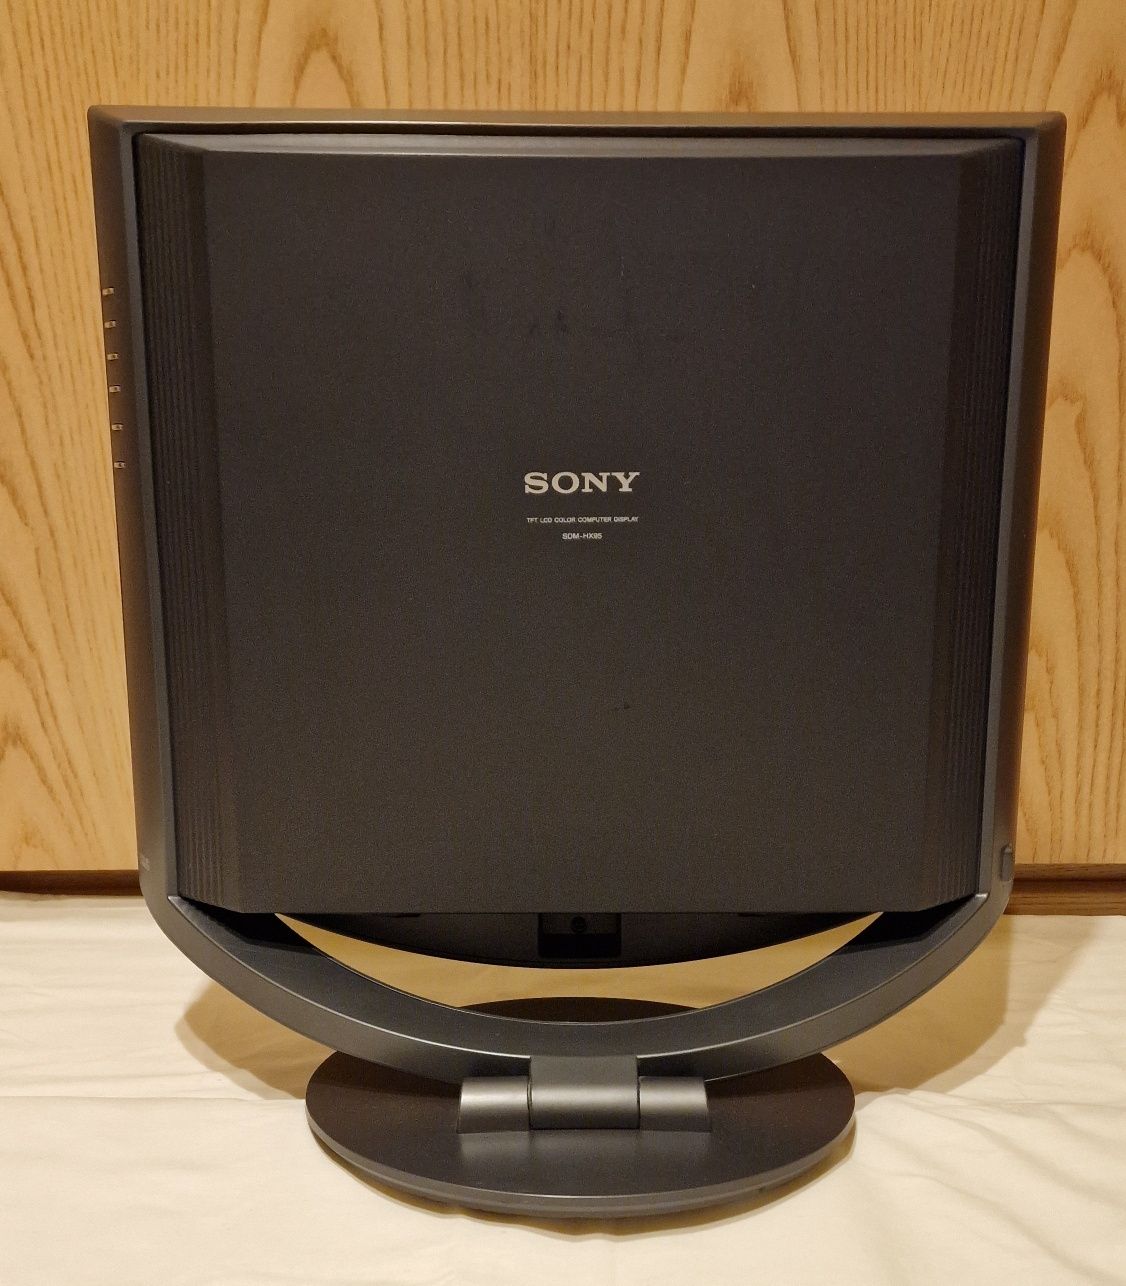 SONY SDM HX 95 Monitor Lcd 19 inch Perfect Functional